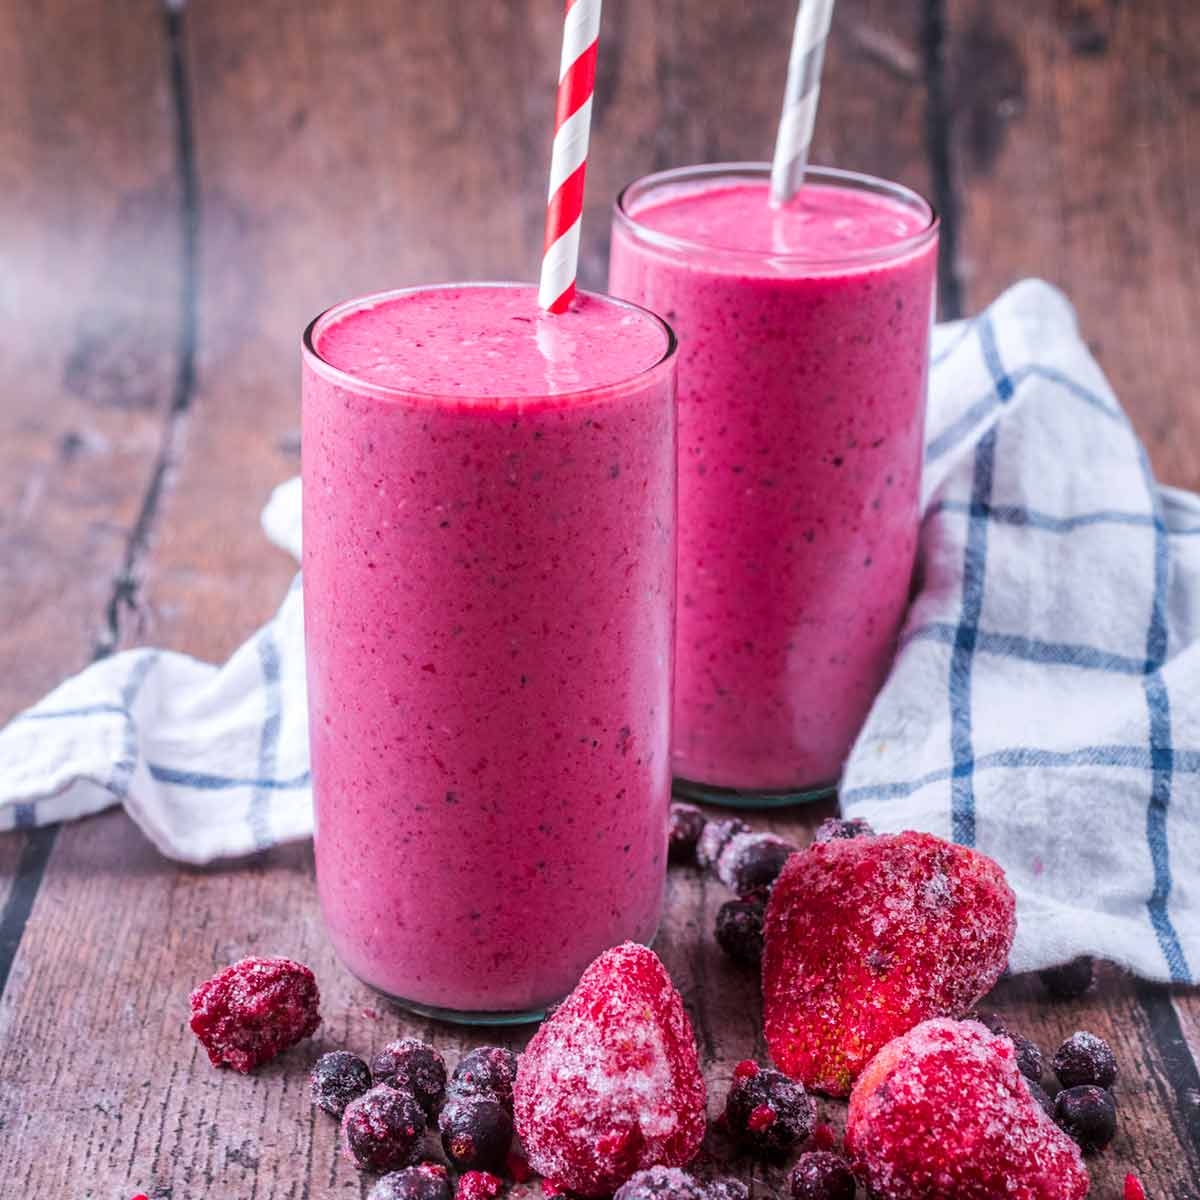 https://hungryhealthyhappy.com/wp-content/uploads/2023/05/frozen-fruit-smoothie-featured.jpg